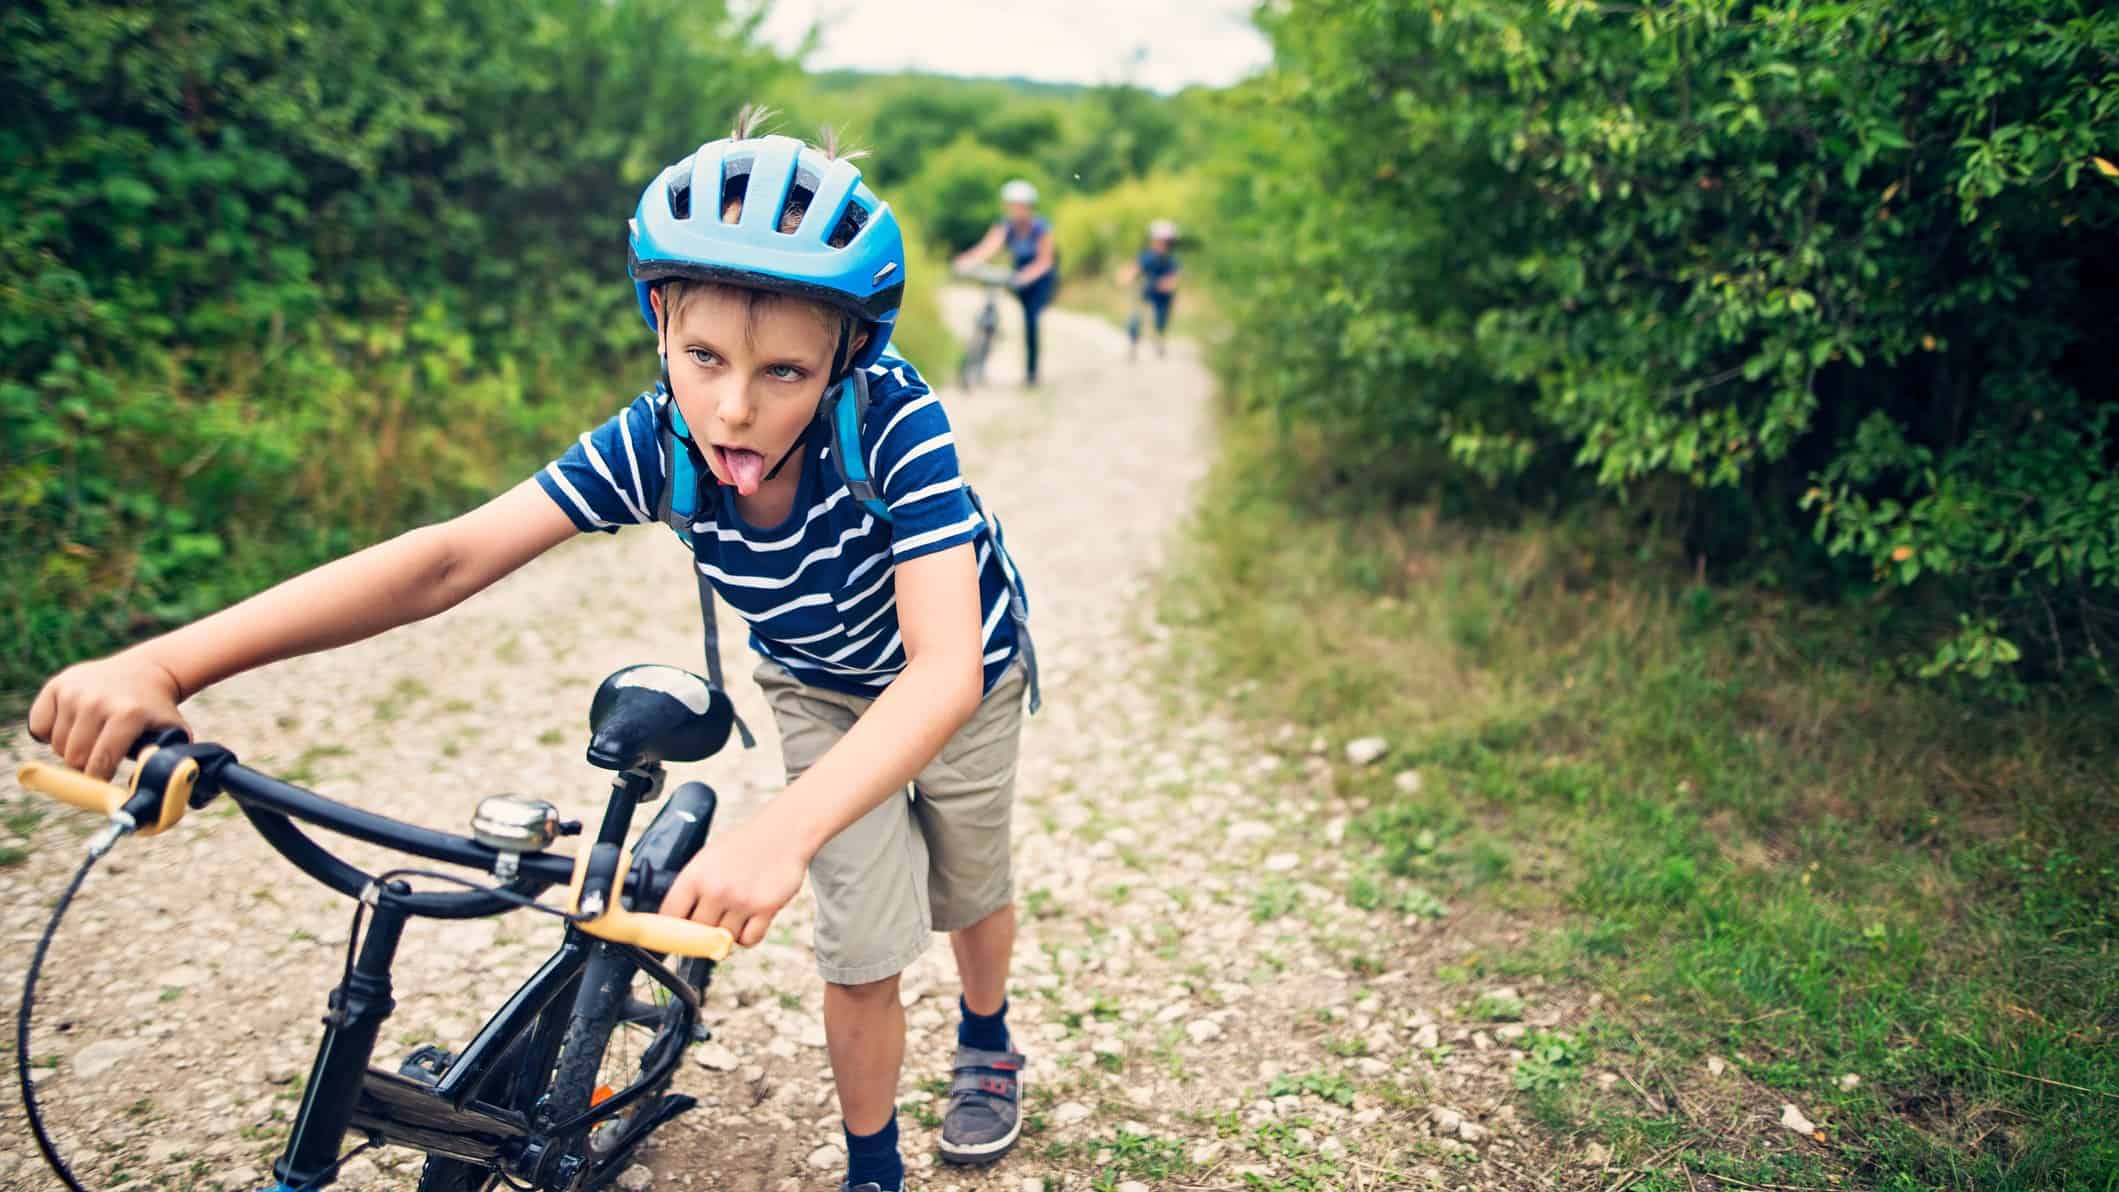 a young boy pushes his bicycle uphill on a rocky road. He is wearing a helmet and has his tongue hanging out as though he is making a face to show how exhausted he is.